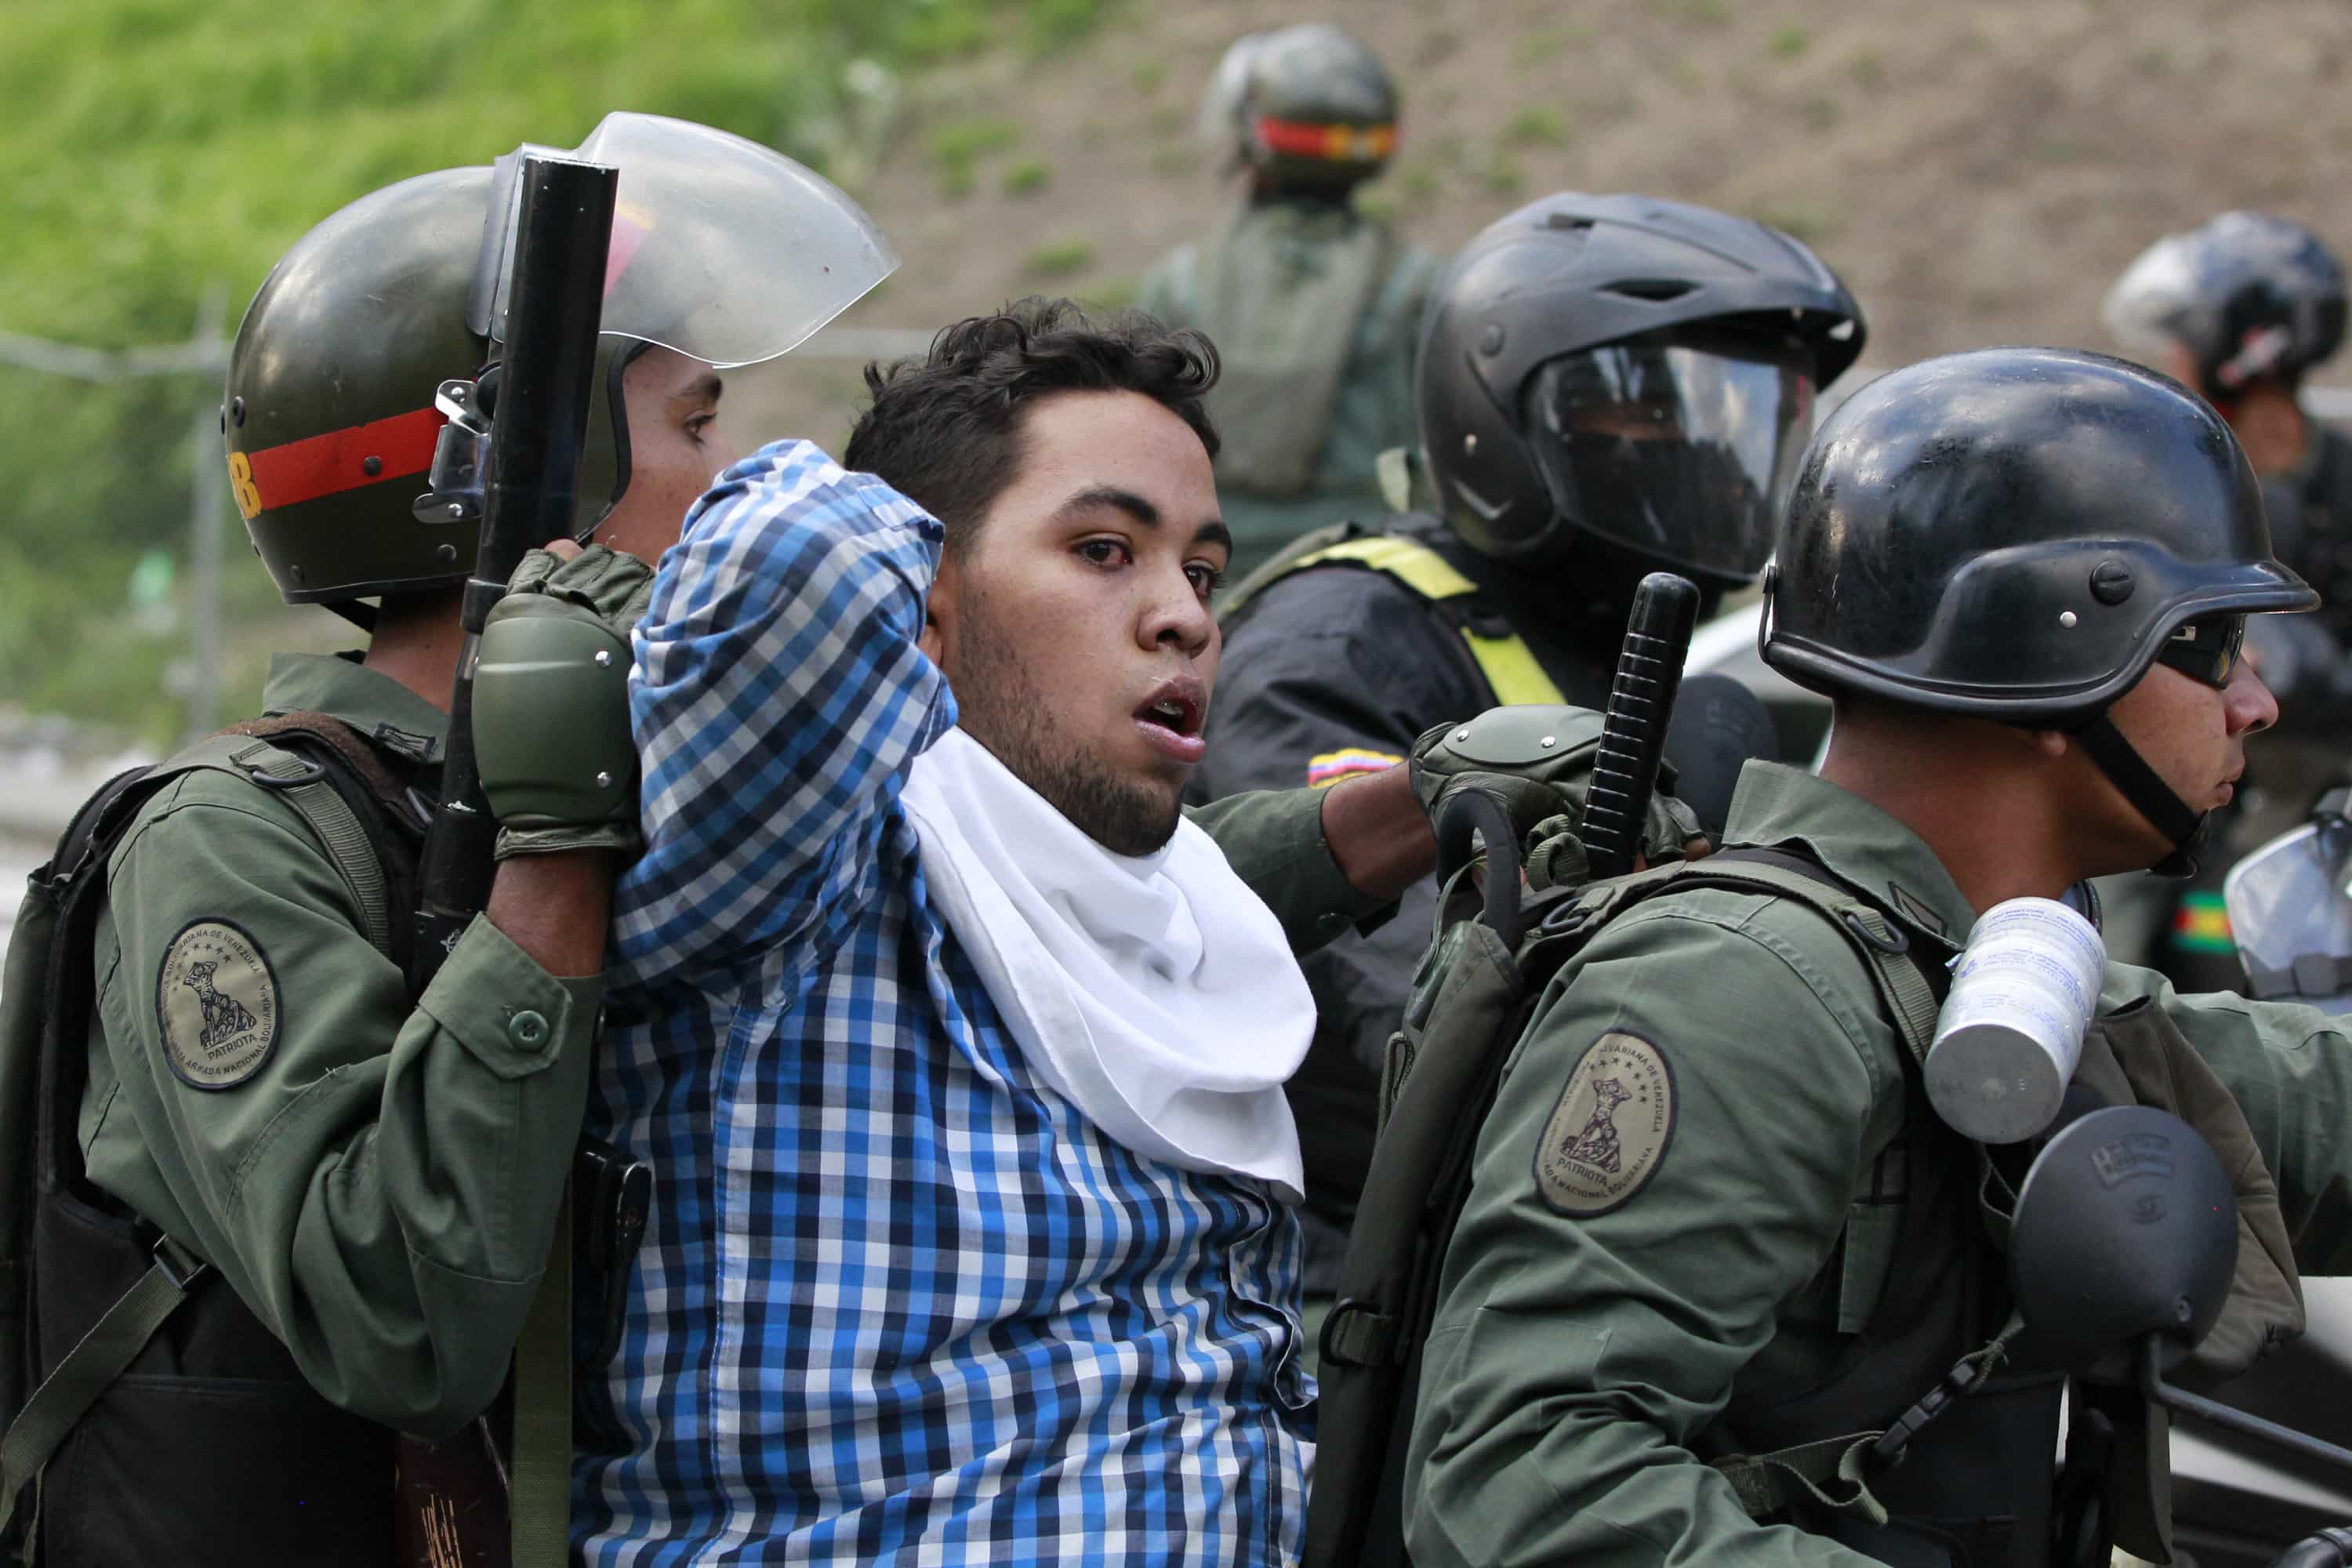 Venezuela's national guards detain an anti-government protester during a protest against President Nicolas Maduro's government in Caracas, 4 June 2014, REUTERS/Christian Veron